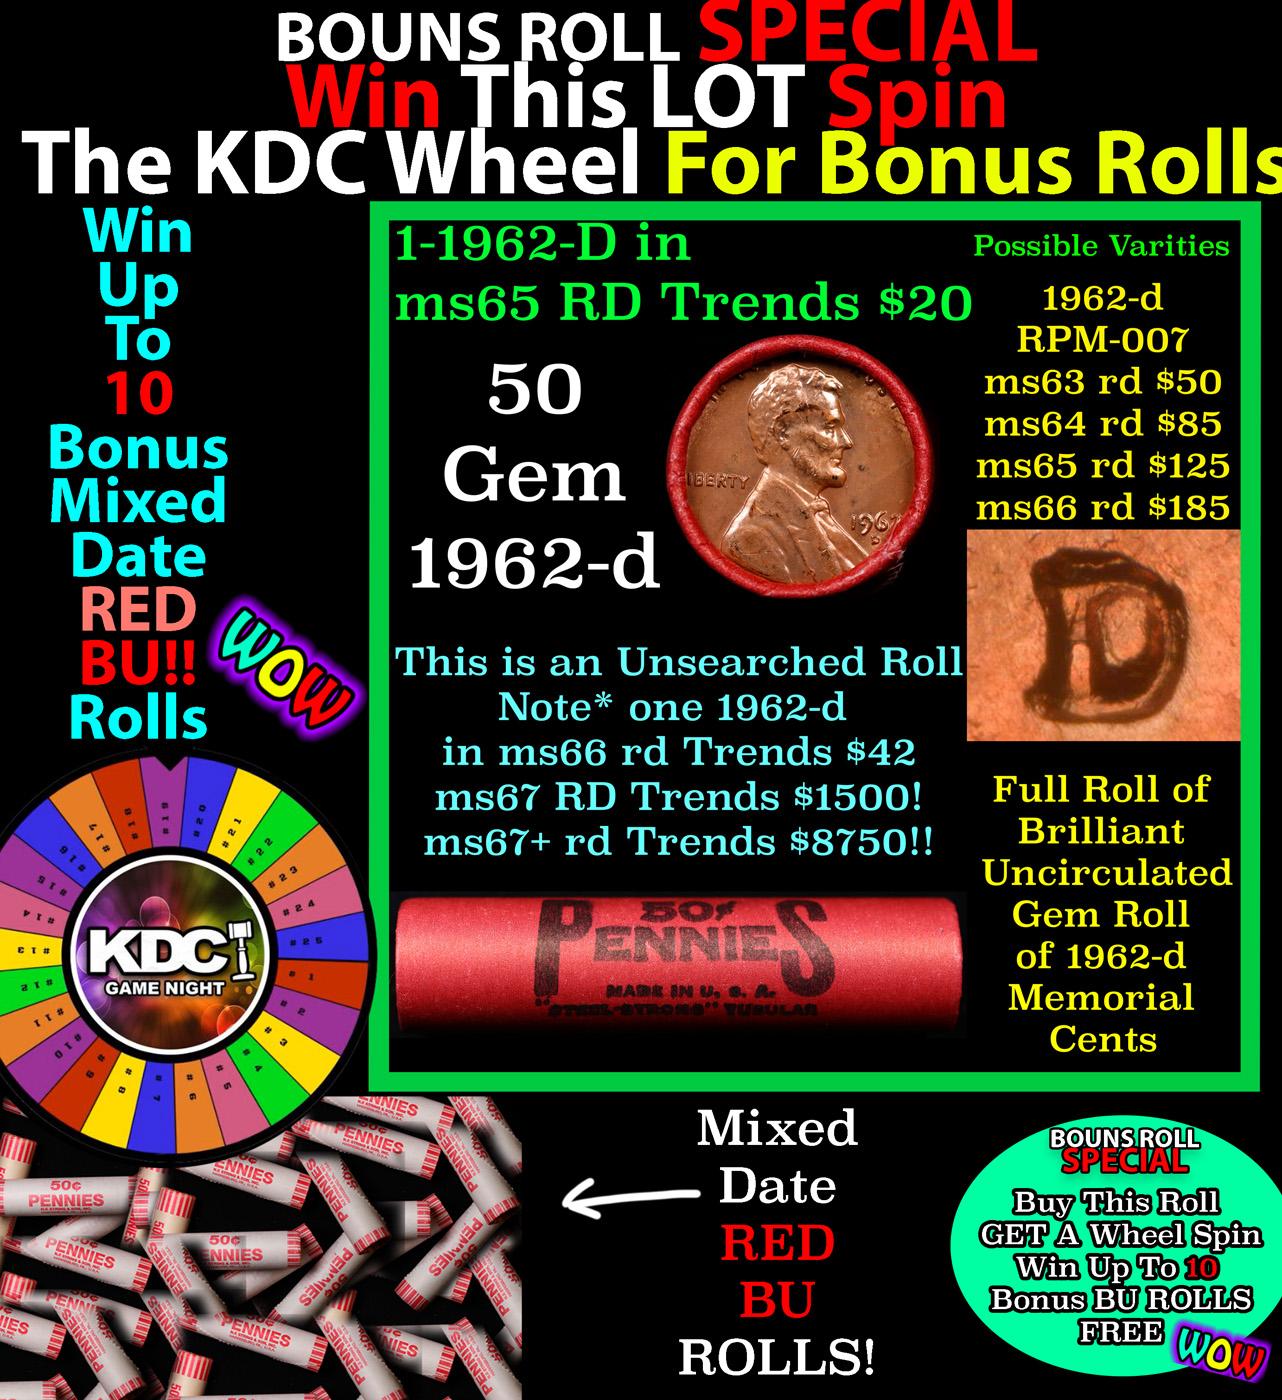 INSANITY The CRAZY Penny Wheel 1000’s won so far, WIN this 1962-d BU RED roll get 1-10 FREE